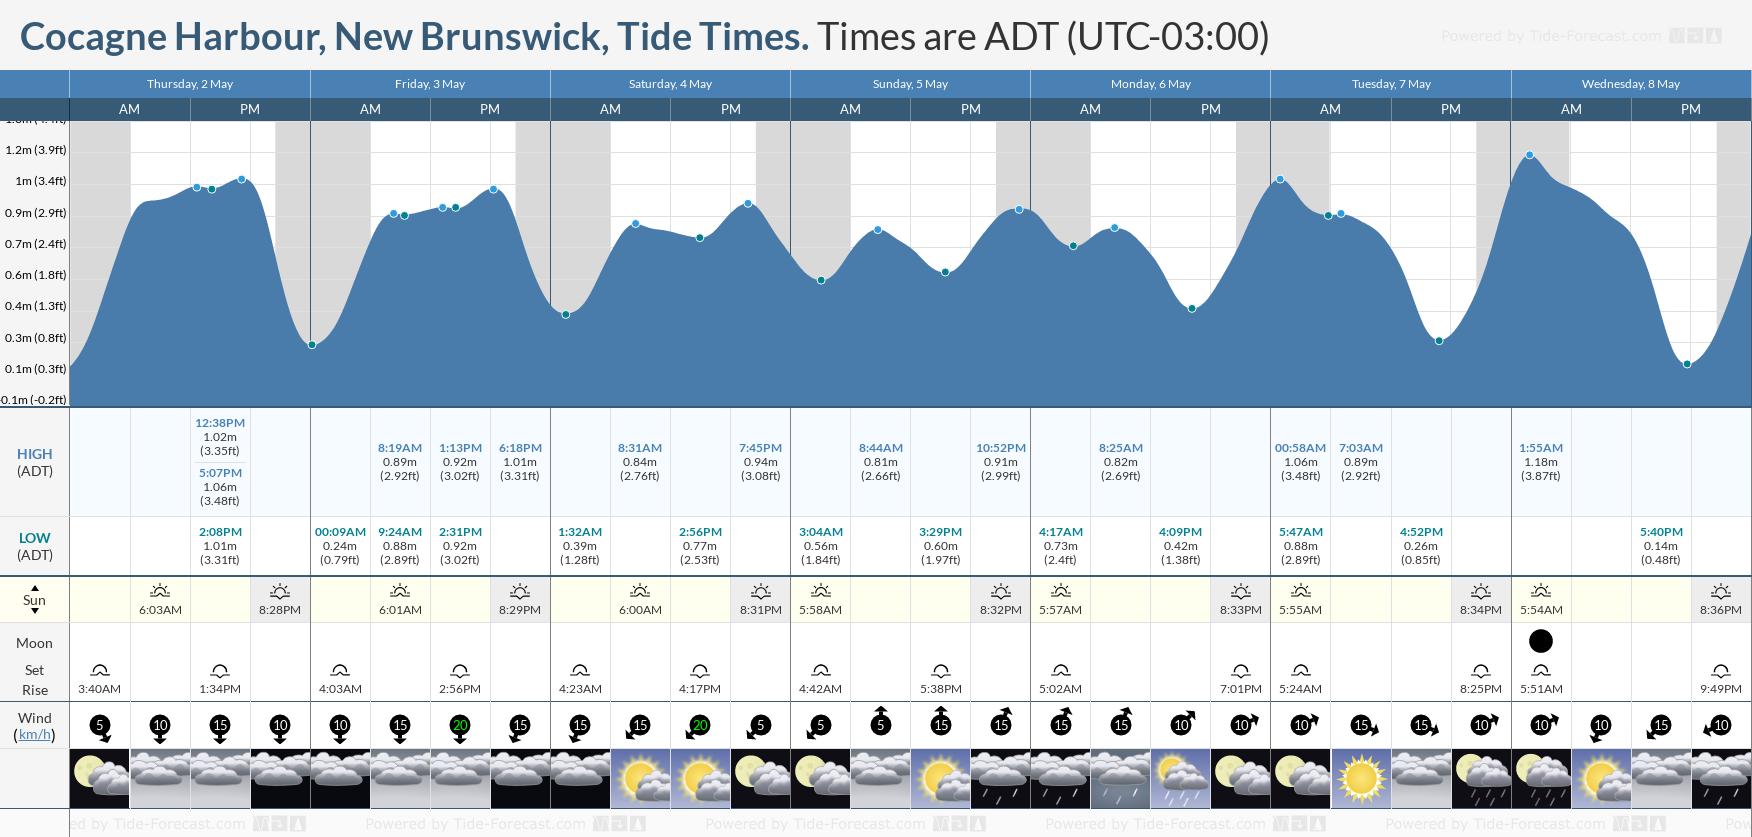 Cocagne Harbour, New Brunswick Tide Chart including high and low tide tide times for the next 7 days